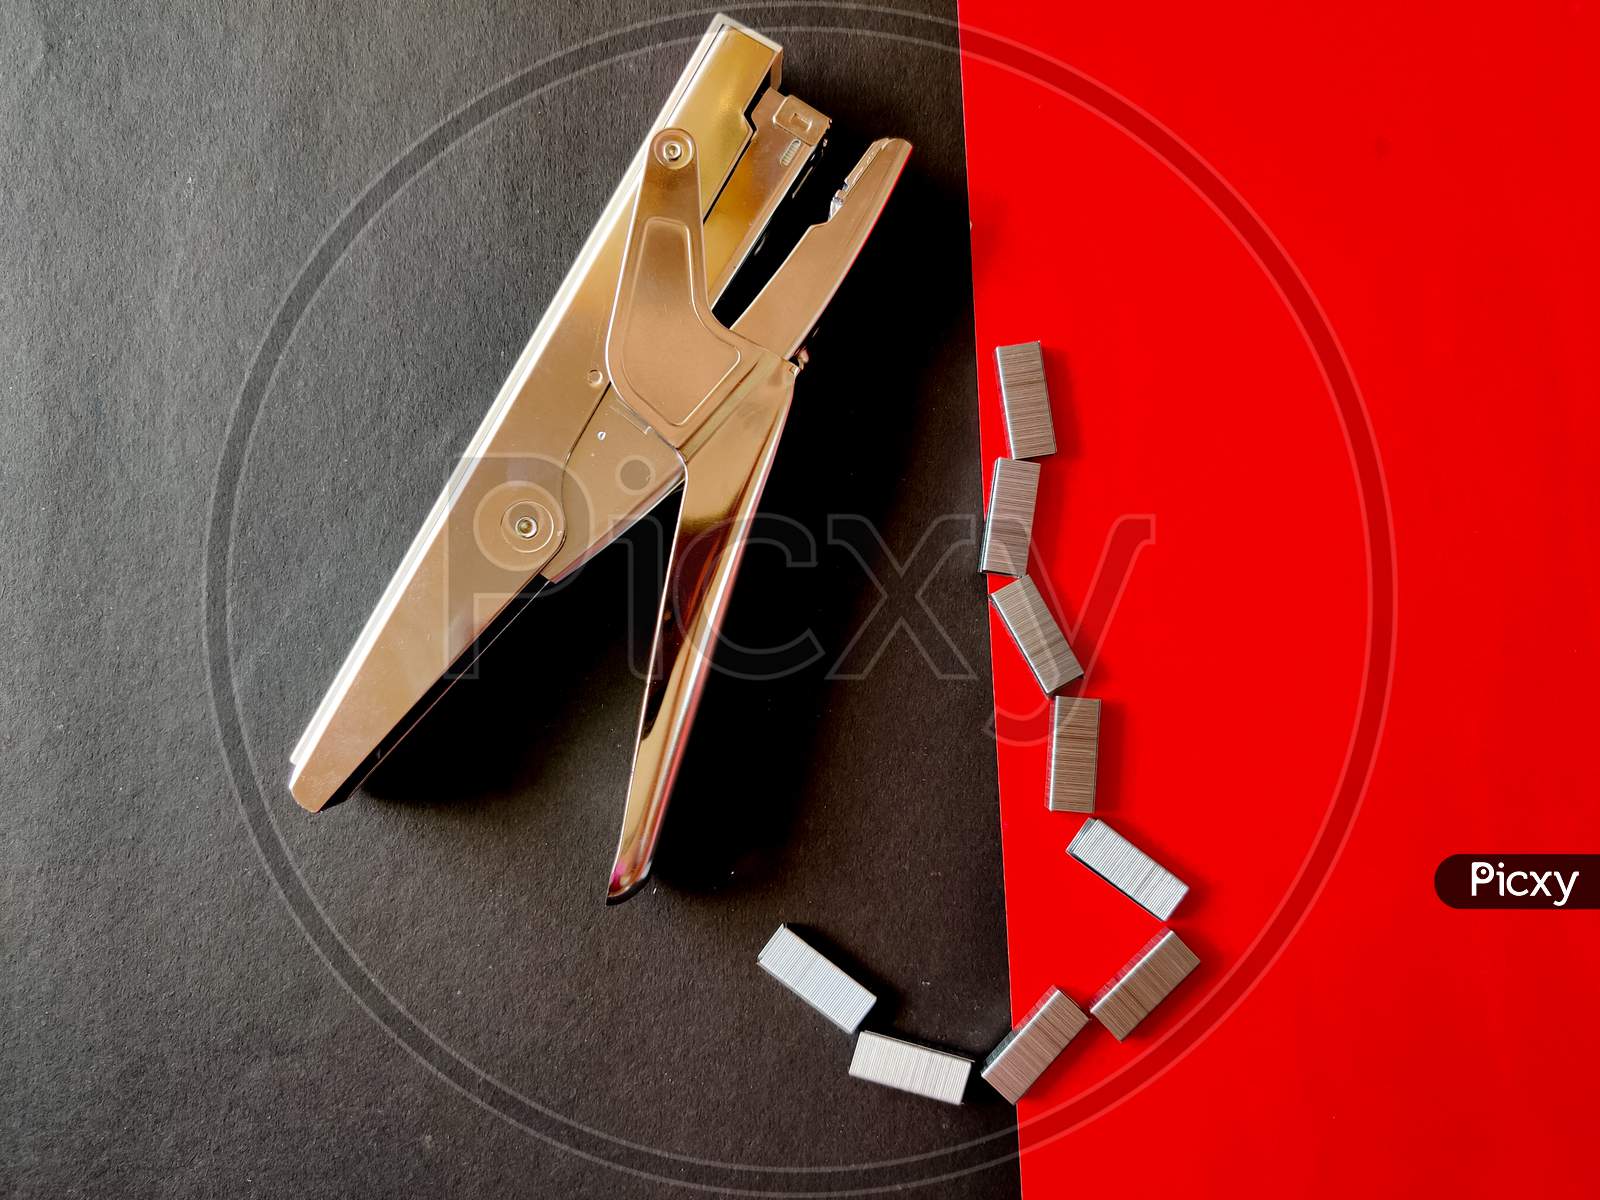 Silver Color Big Stapler And Stapler Pins Isolated On Red Background.